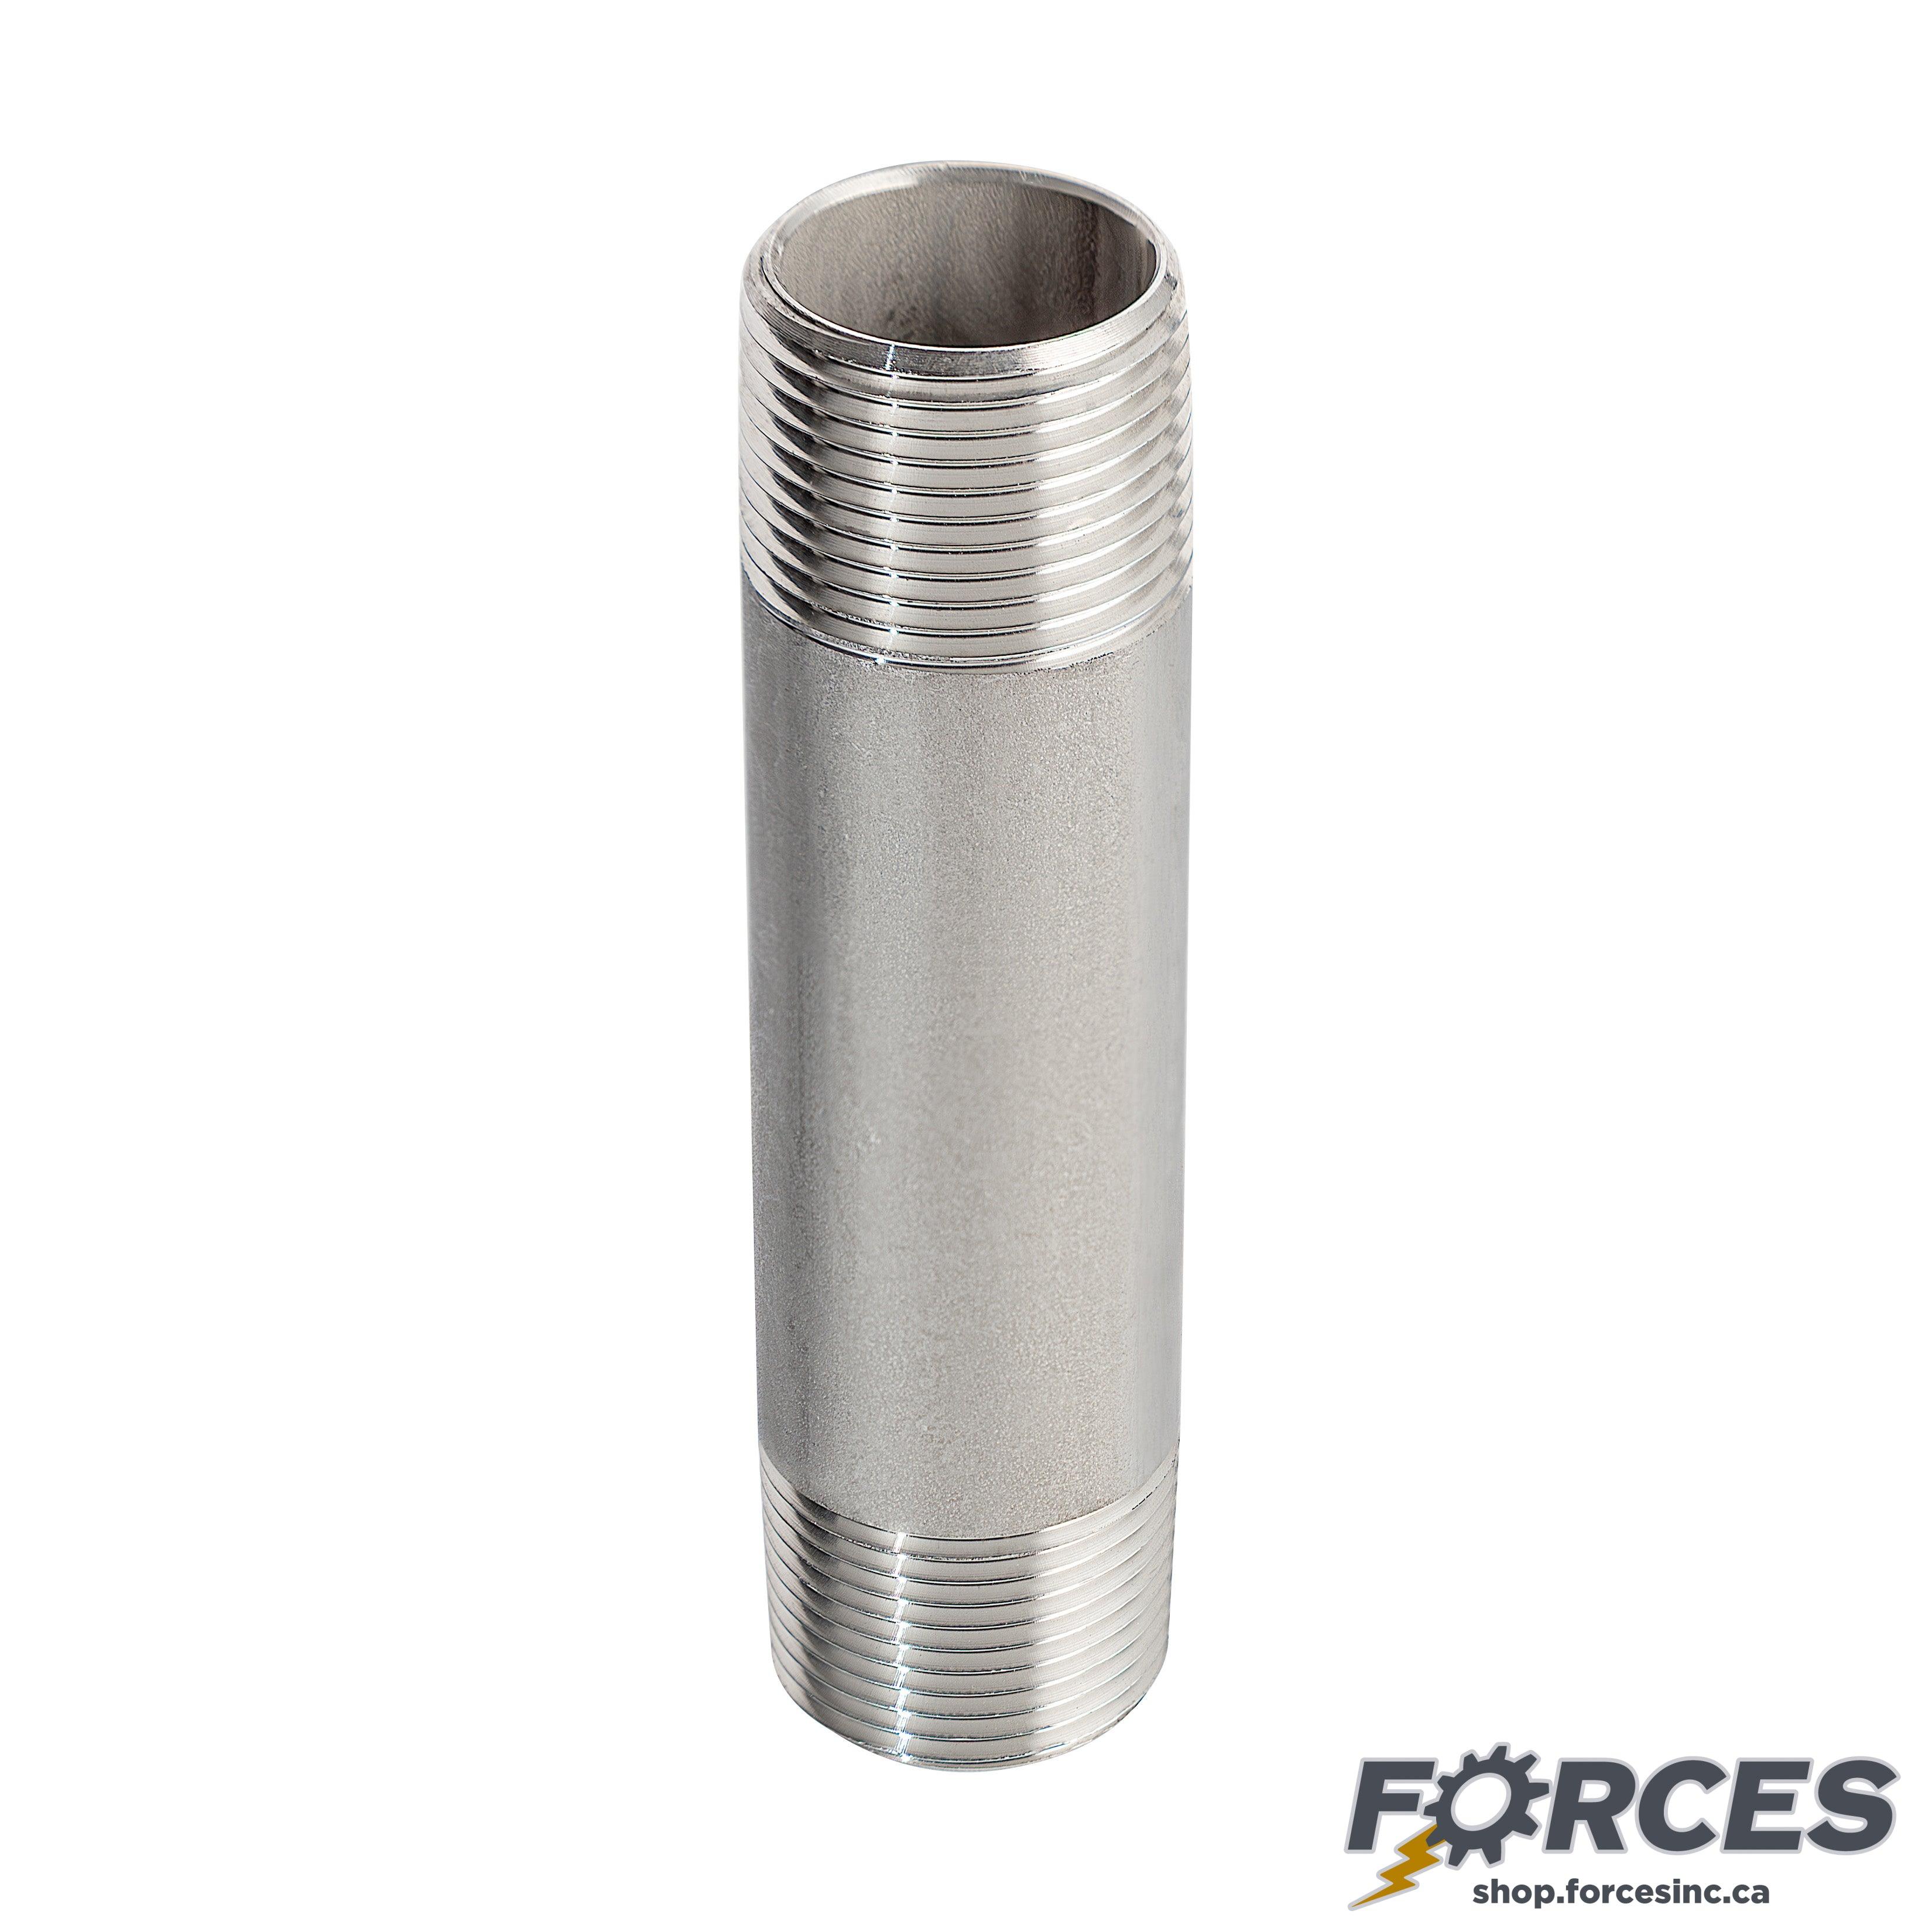 1-1/4" X 3" Long Nipple - Stainless Steel 316 - Forces Inc